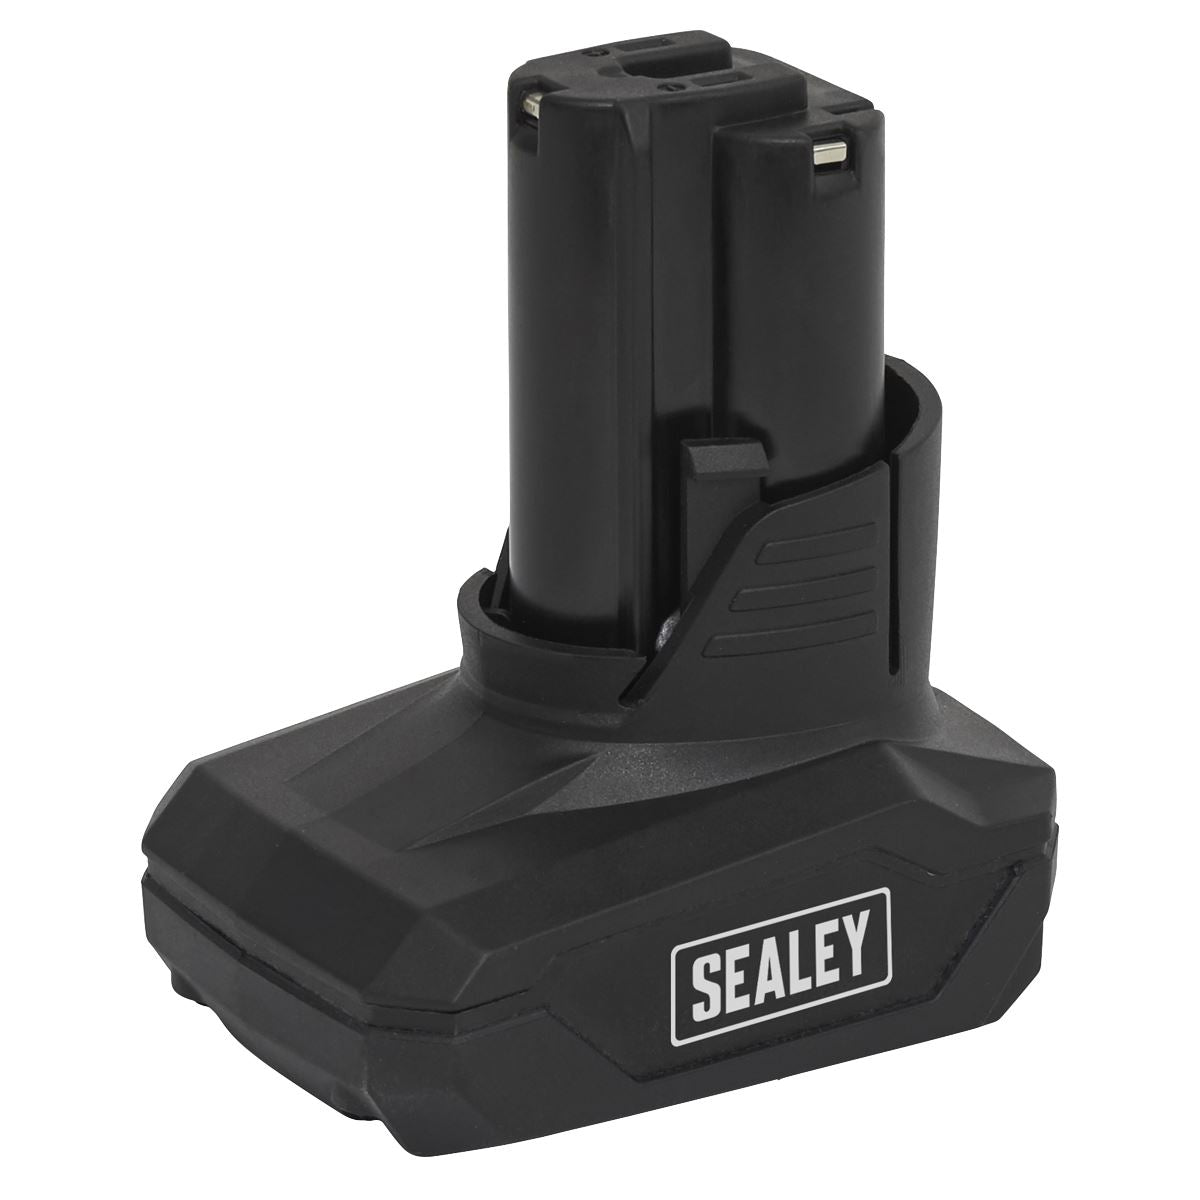 Sealey Impact Wrench Kit 3/8"Sq Drive 12V Lithium-ion - 3 Batteries